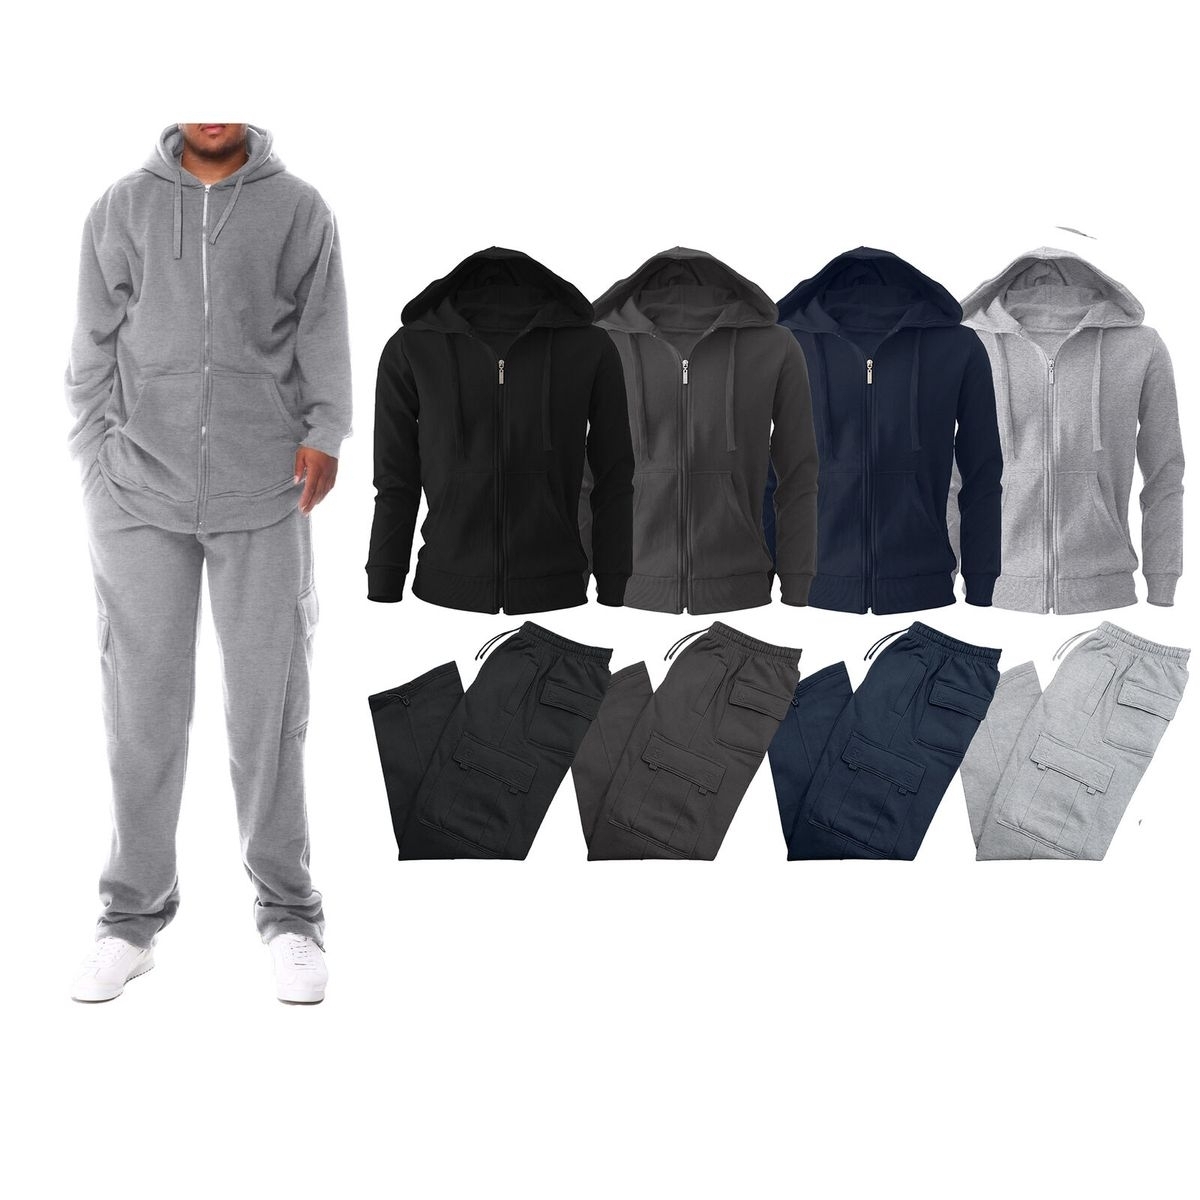 Multi-Pack: Men's Big & Tall Winter Warm Athletic Active Cozy Fleece Lined Multi-Pocket Full Zip Up Cargo Tracksuit - Navy, 1-pack, X-large